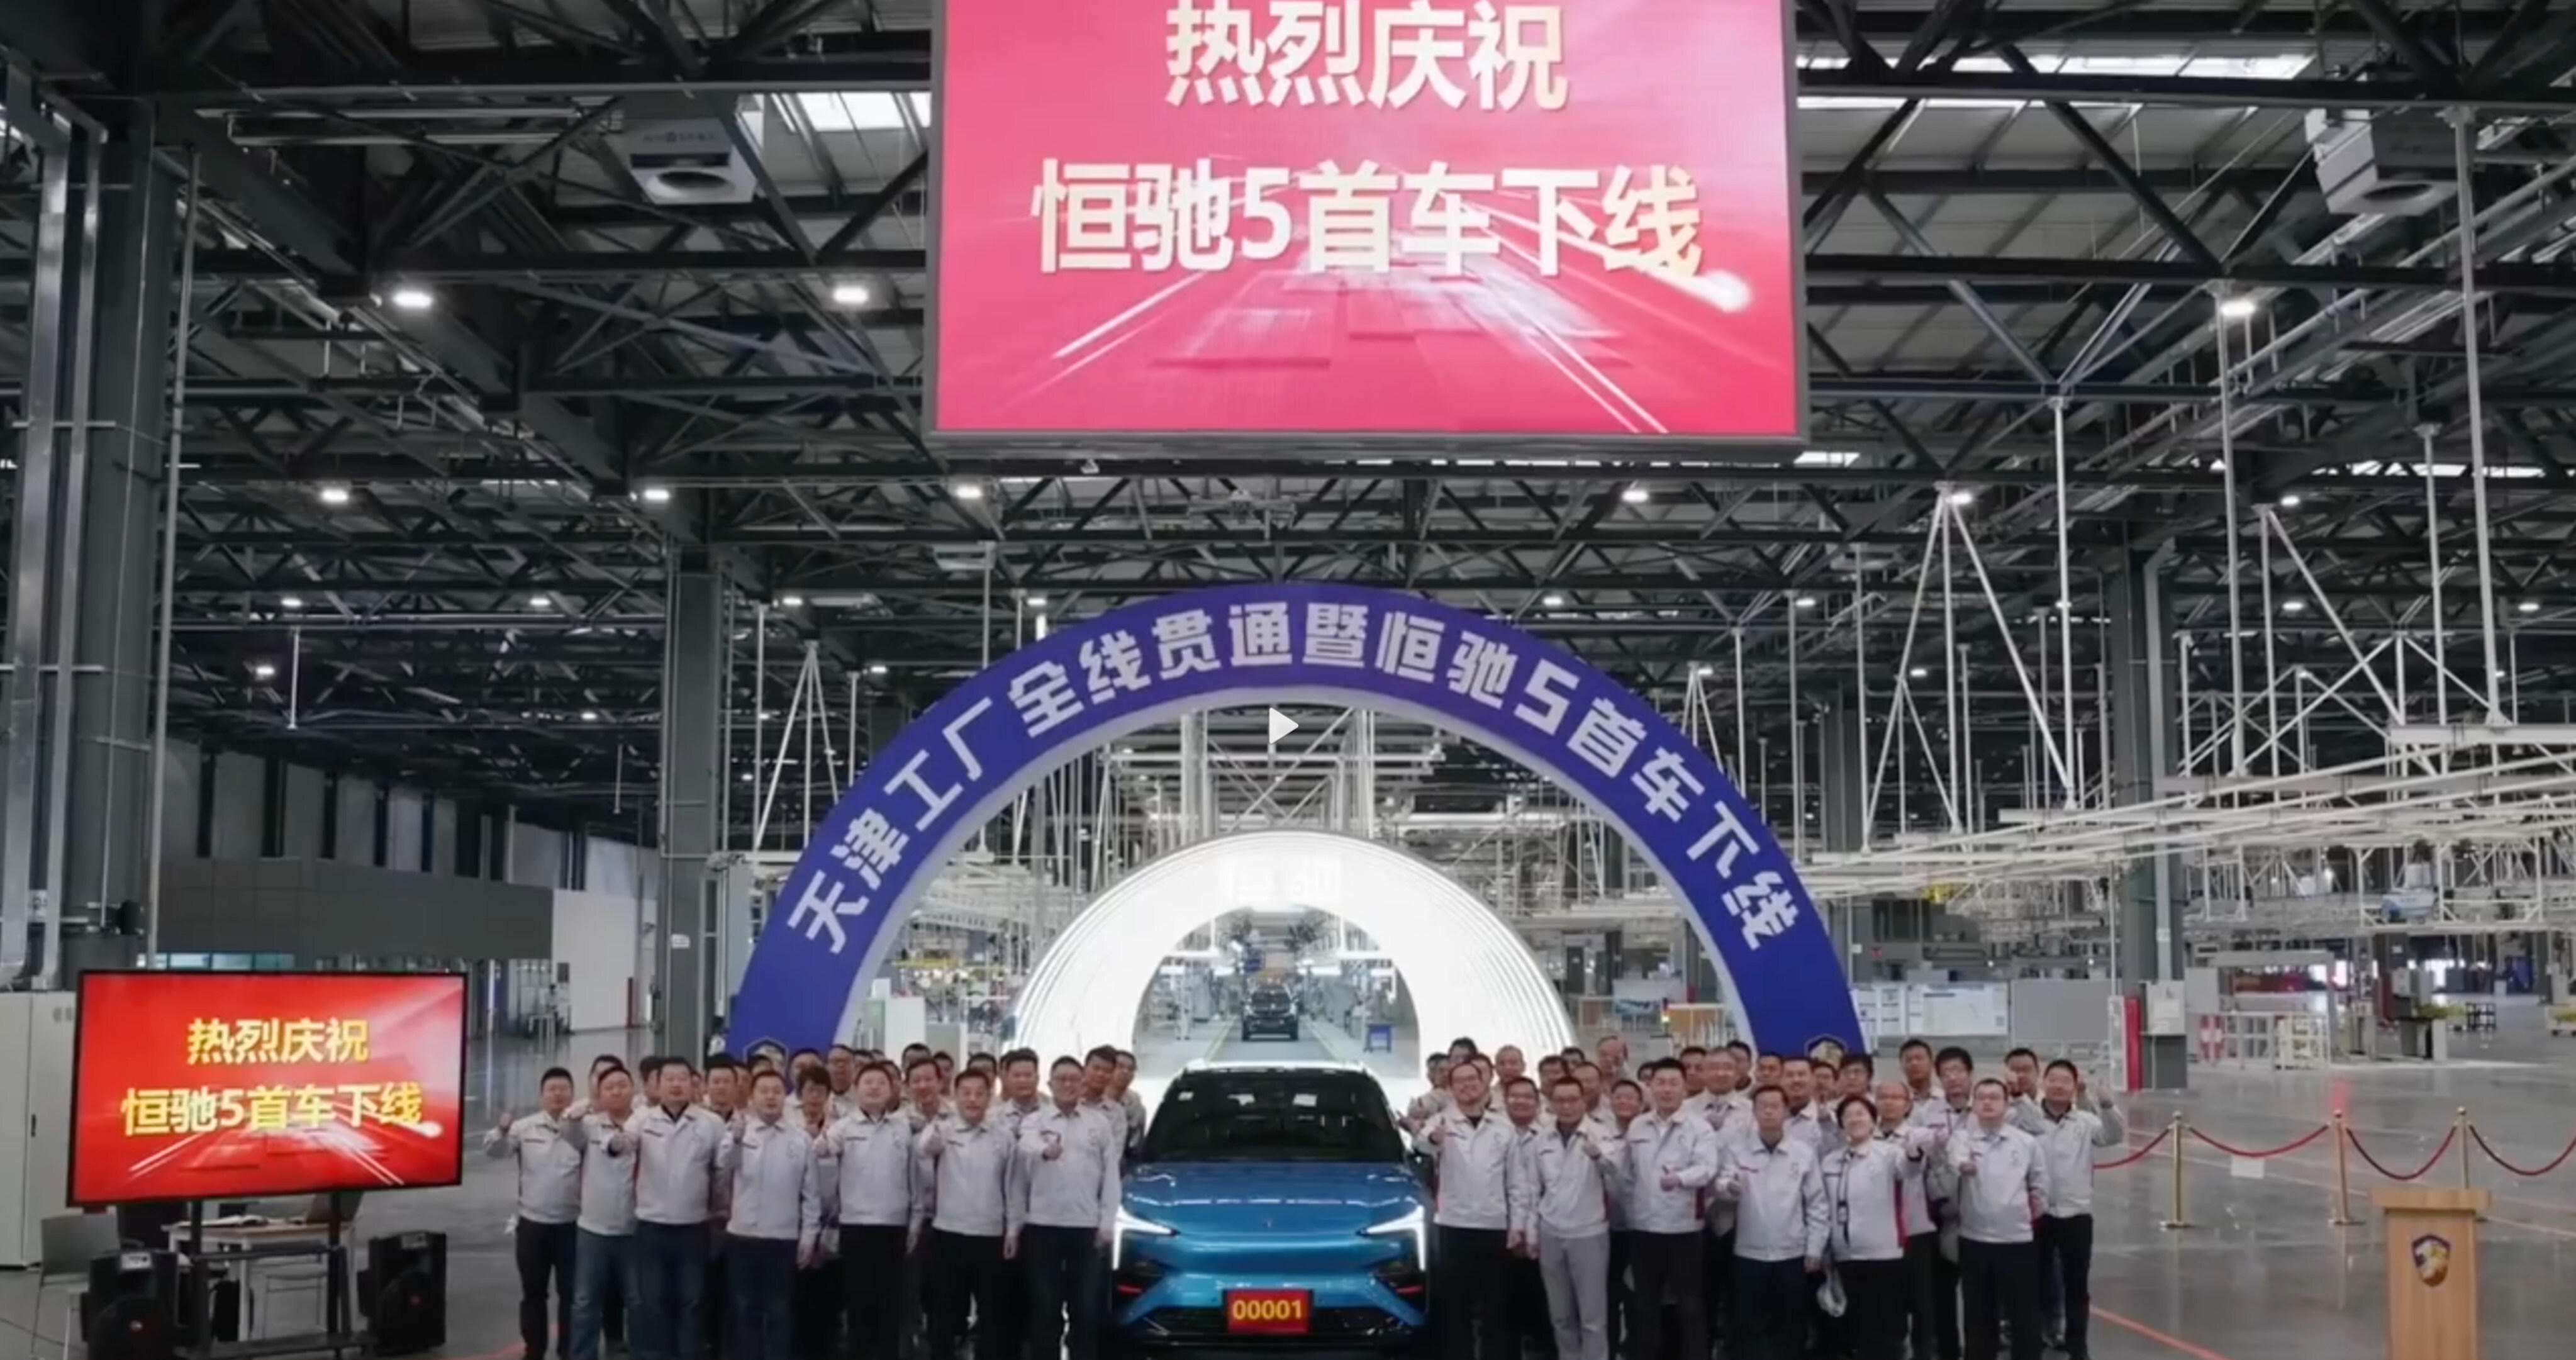 Screen capture of the launch of the Hengchi 5 all-electric compact sports-utility vehicle by China Evergrande Group’s unit Evergrande New Energy Vehicle. Photo: Weibo